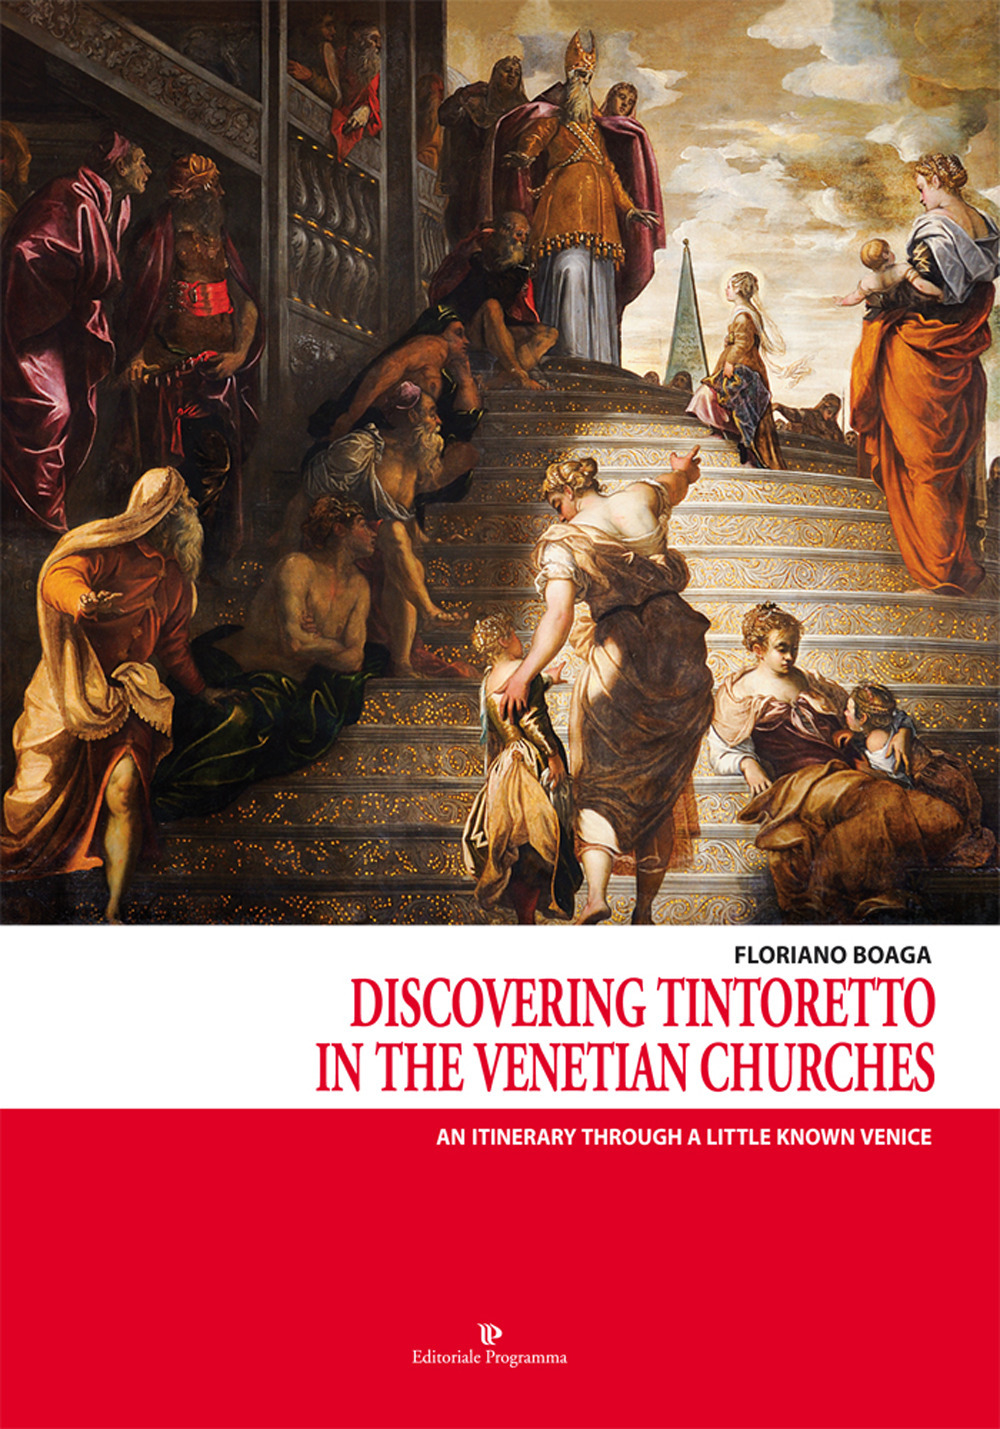 Discovering Tintoretto in the venetian churches. An itinerary through a little known Venice